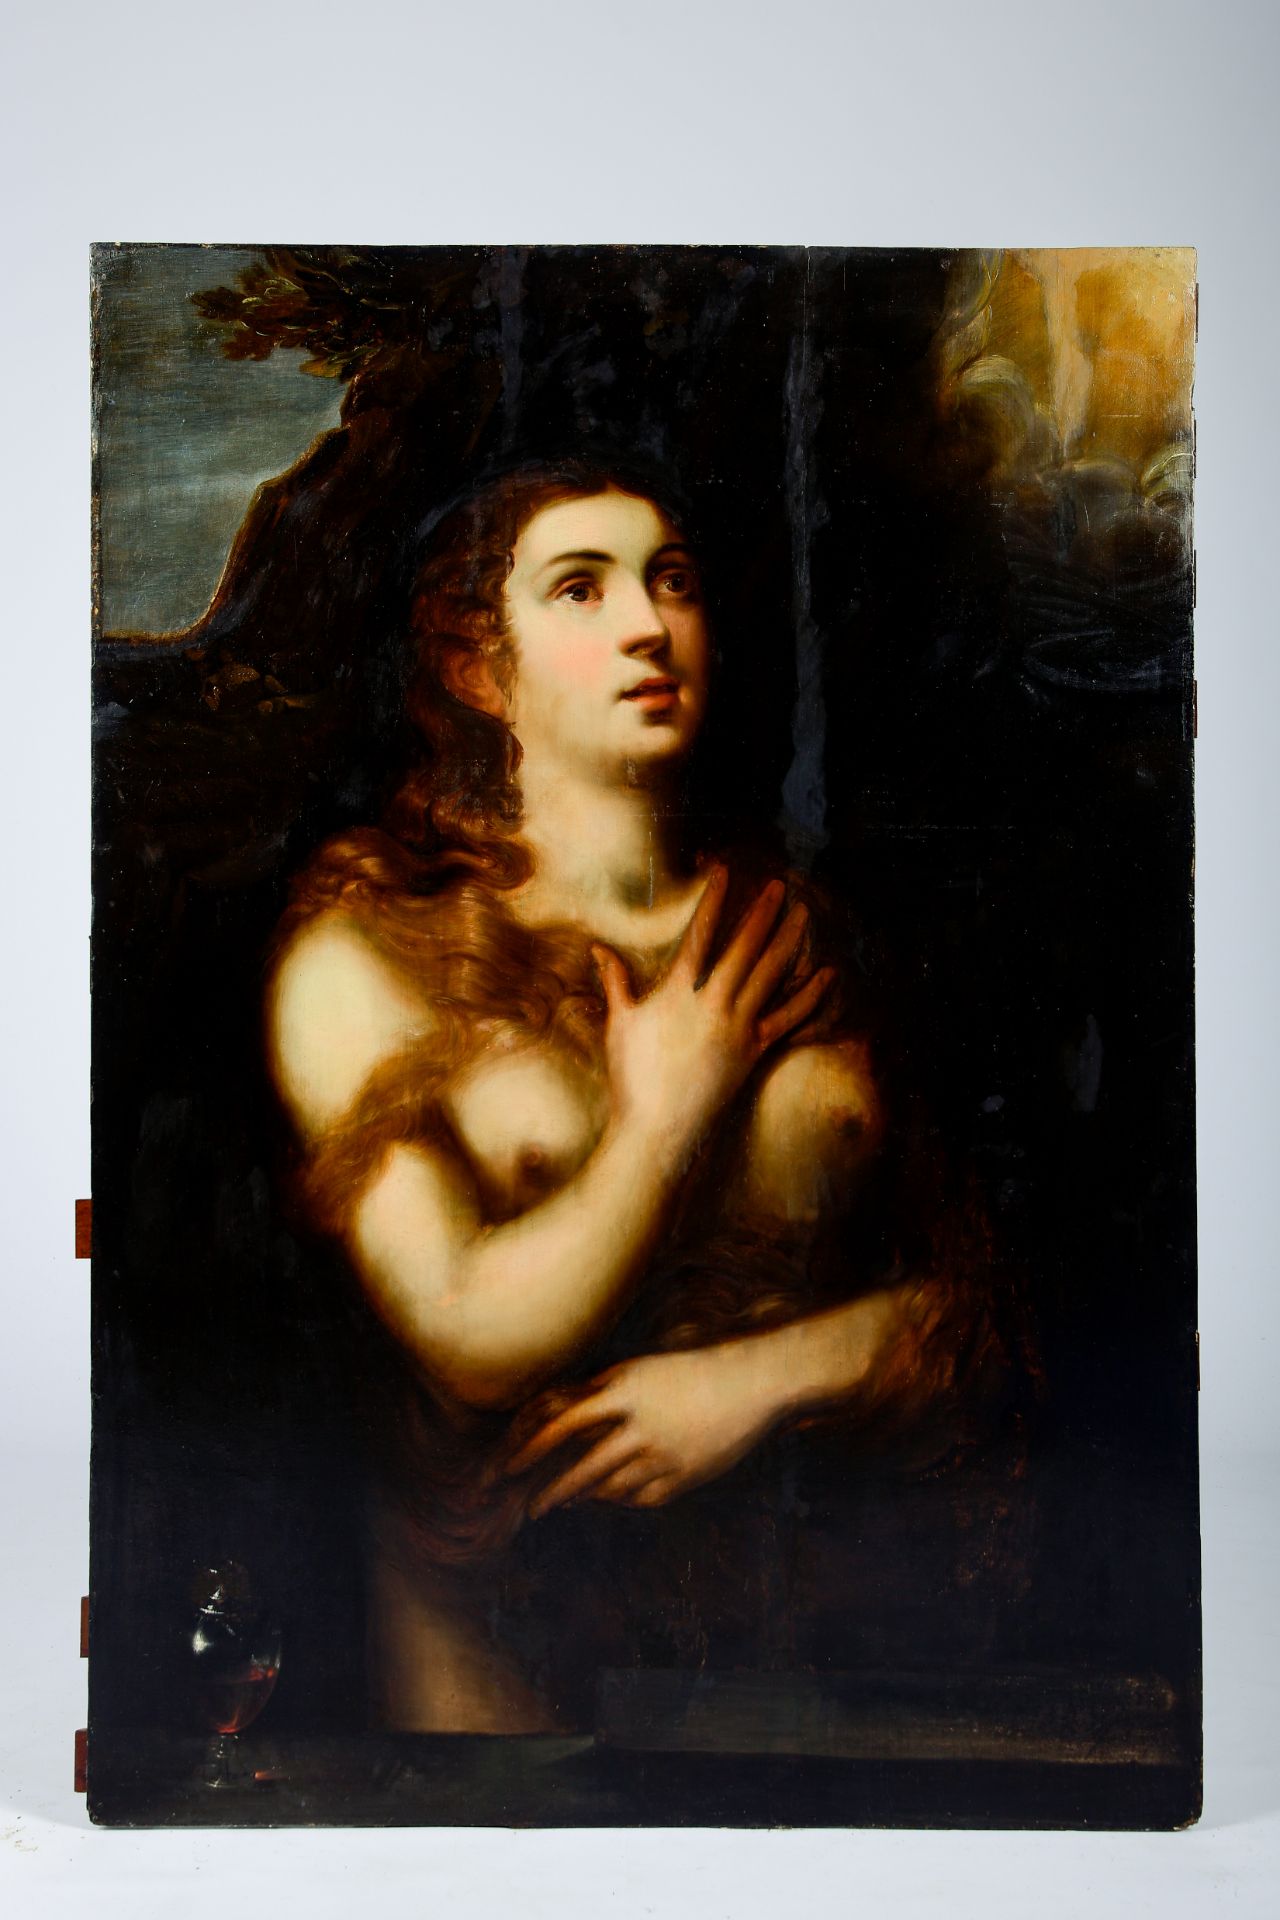 Flemish school, foll. of Titian (ca. 1488-1576), in the manner of M. Coxie (1499-1592): The penance - Image 2 of 4